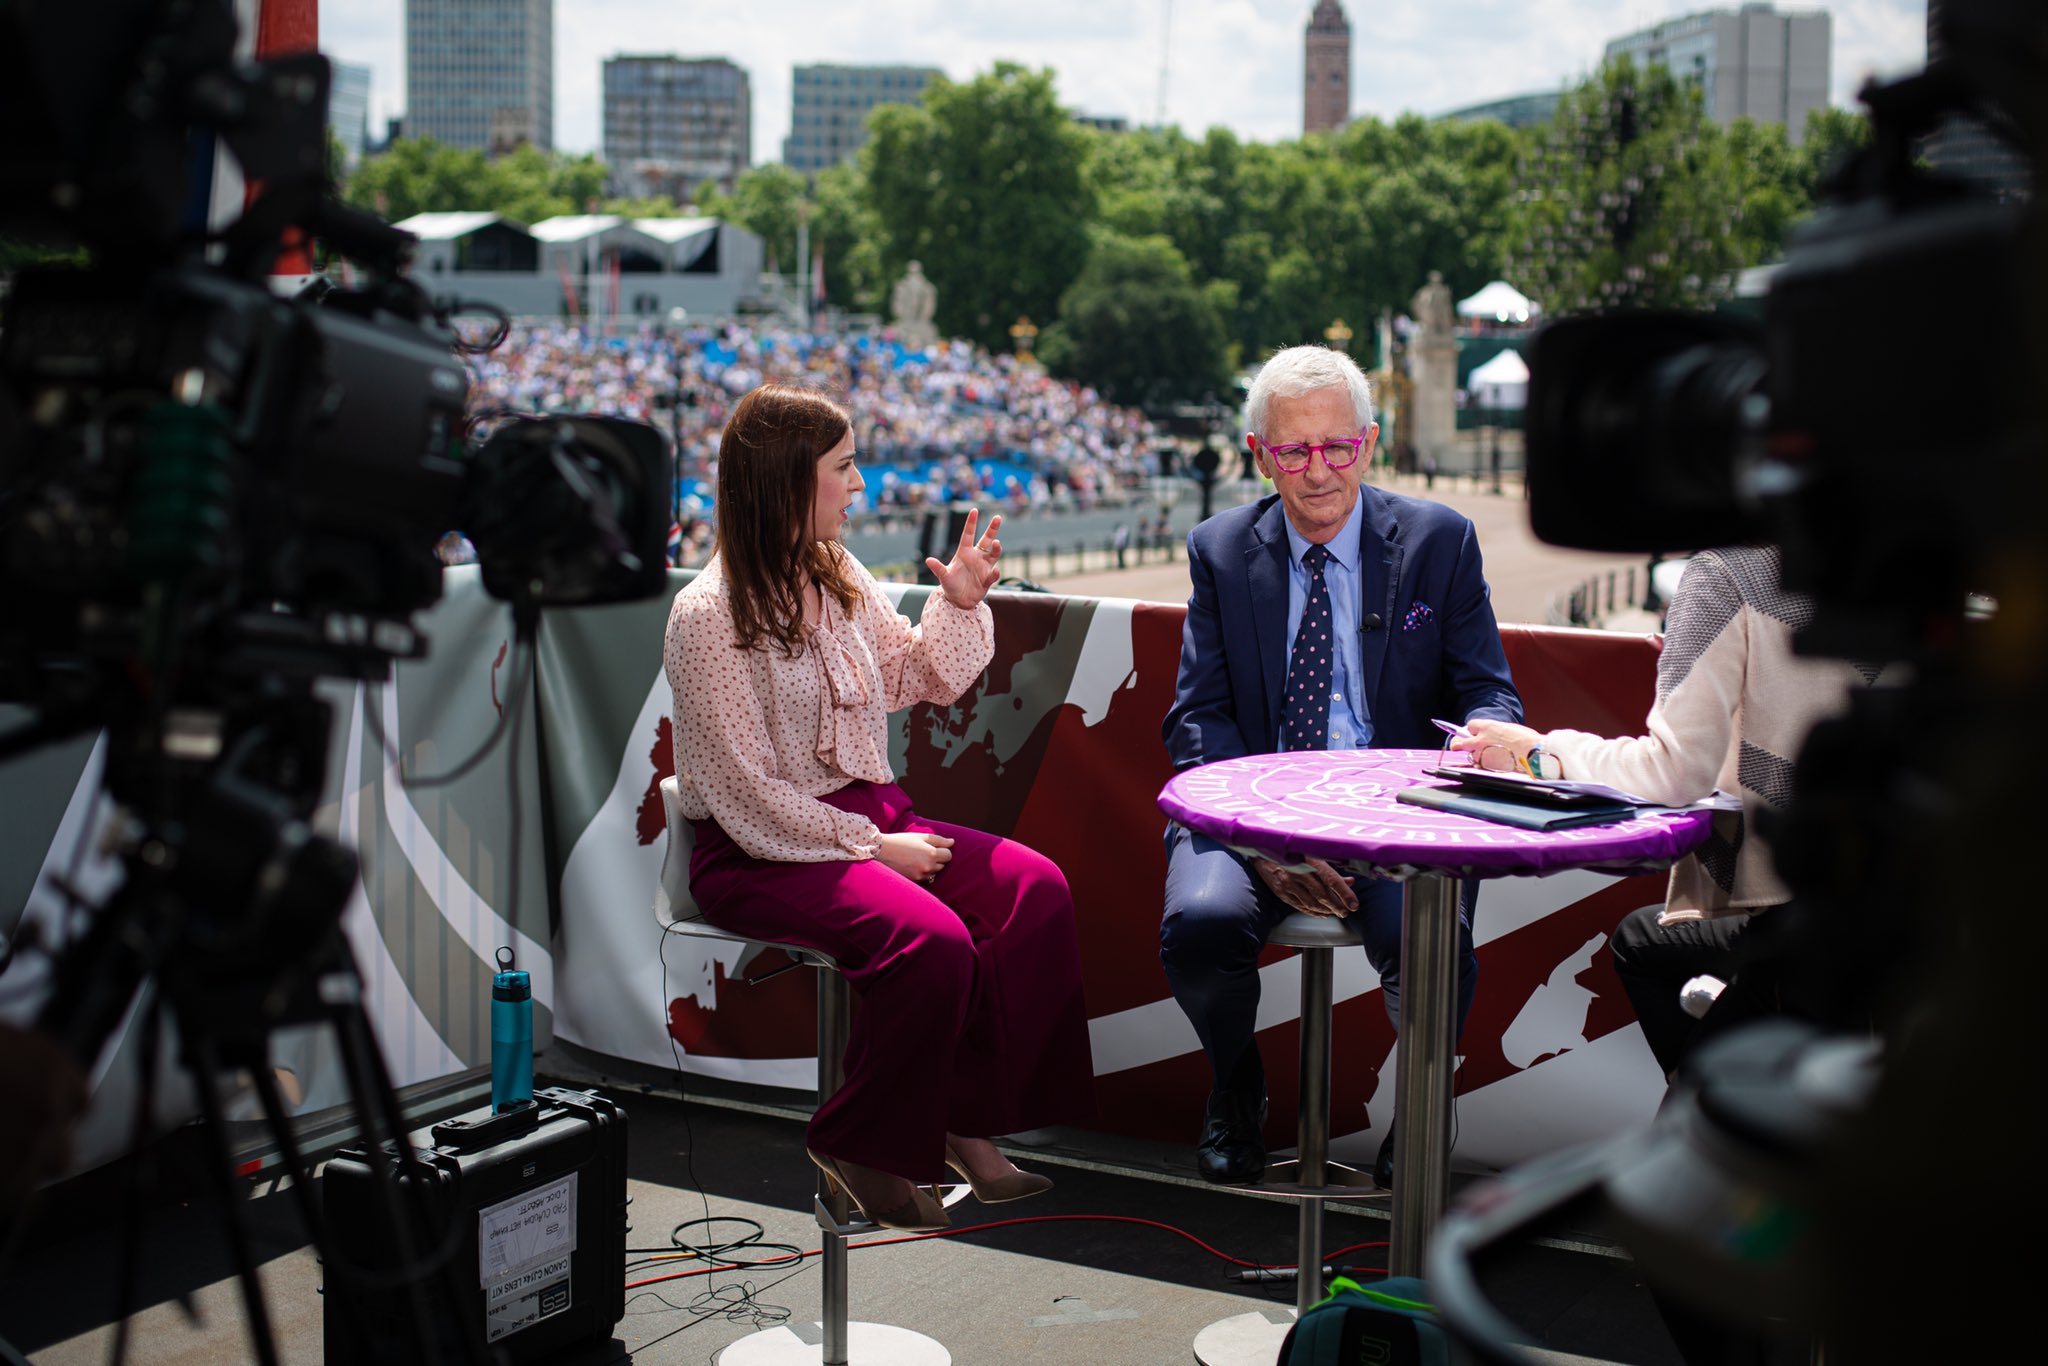 With the BBC for the Platinum Jubilee, 2022